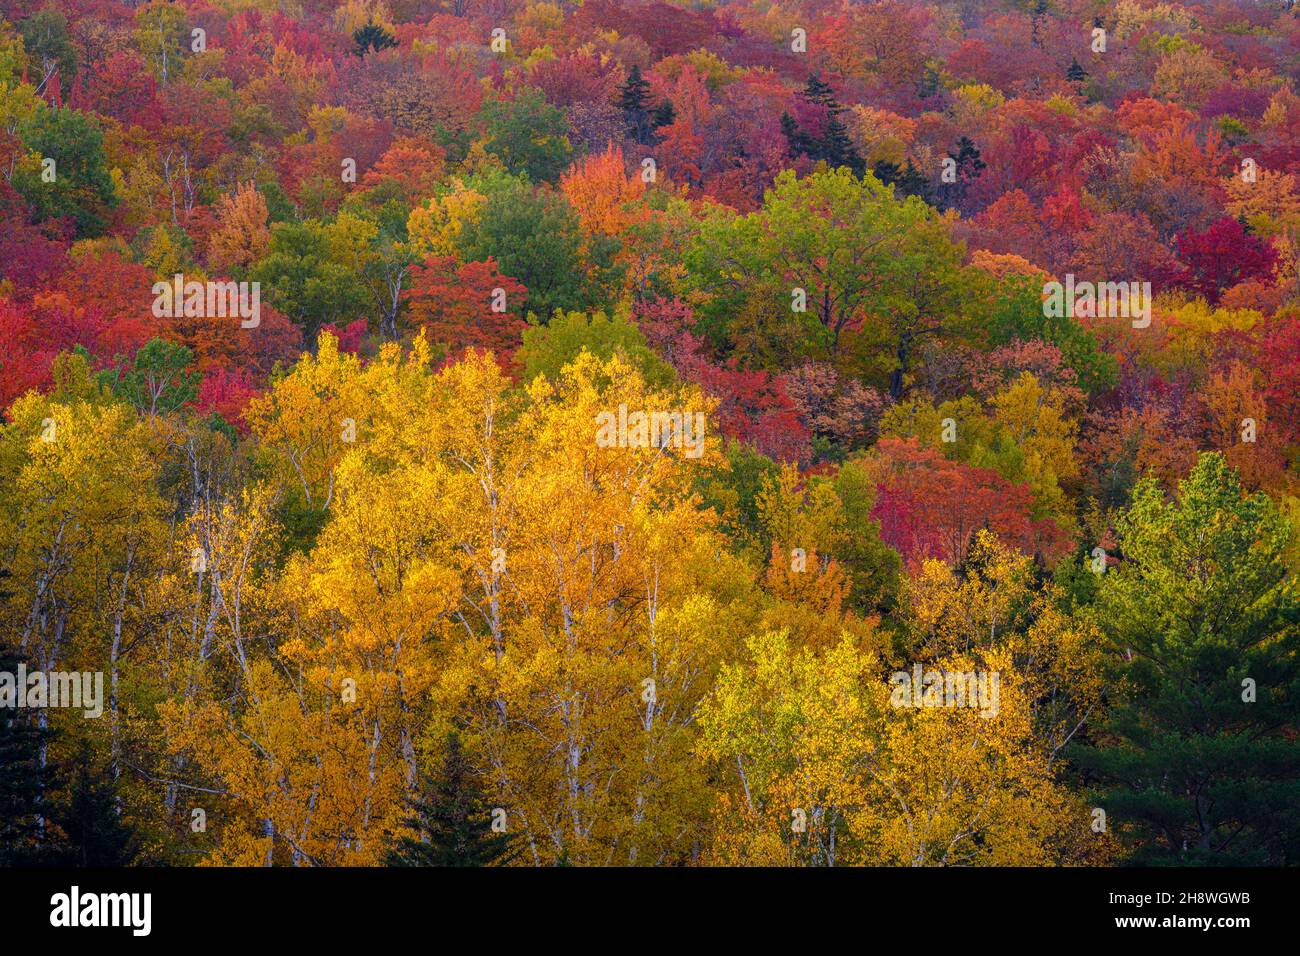 Autumn foliage in the deciduous forest on New England hillsides, Pinkham Notch, New Hampshire, USA Stock Photo